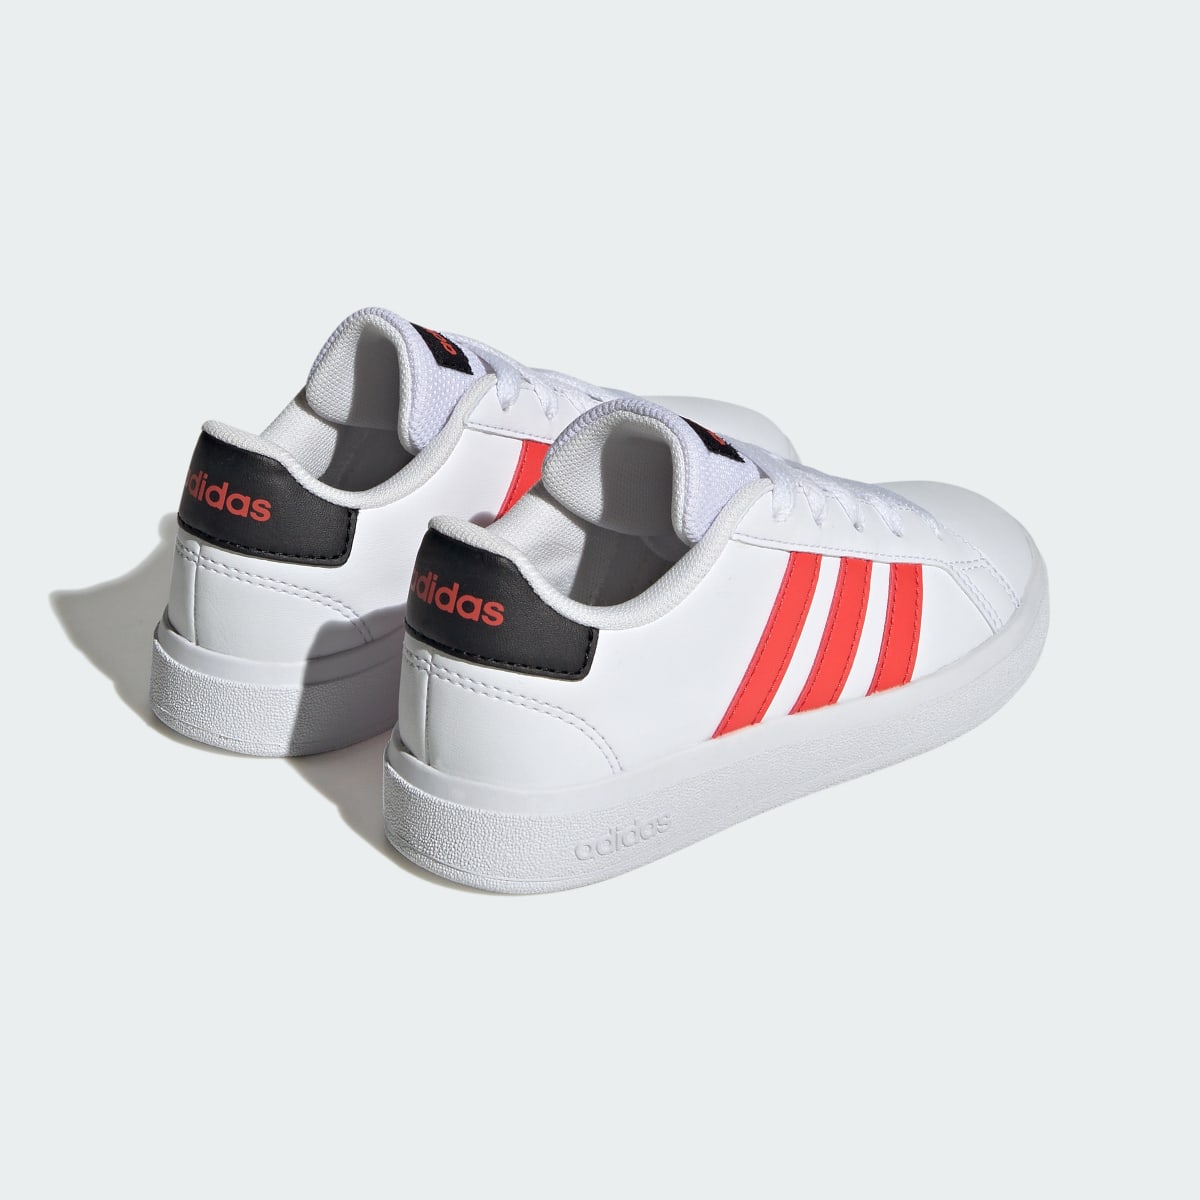 Adidas Buty Grand Court Lifestyle Tennis Lace-Up. 6